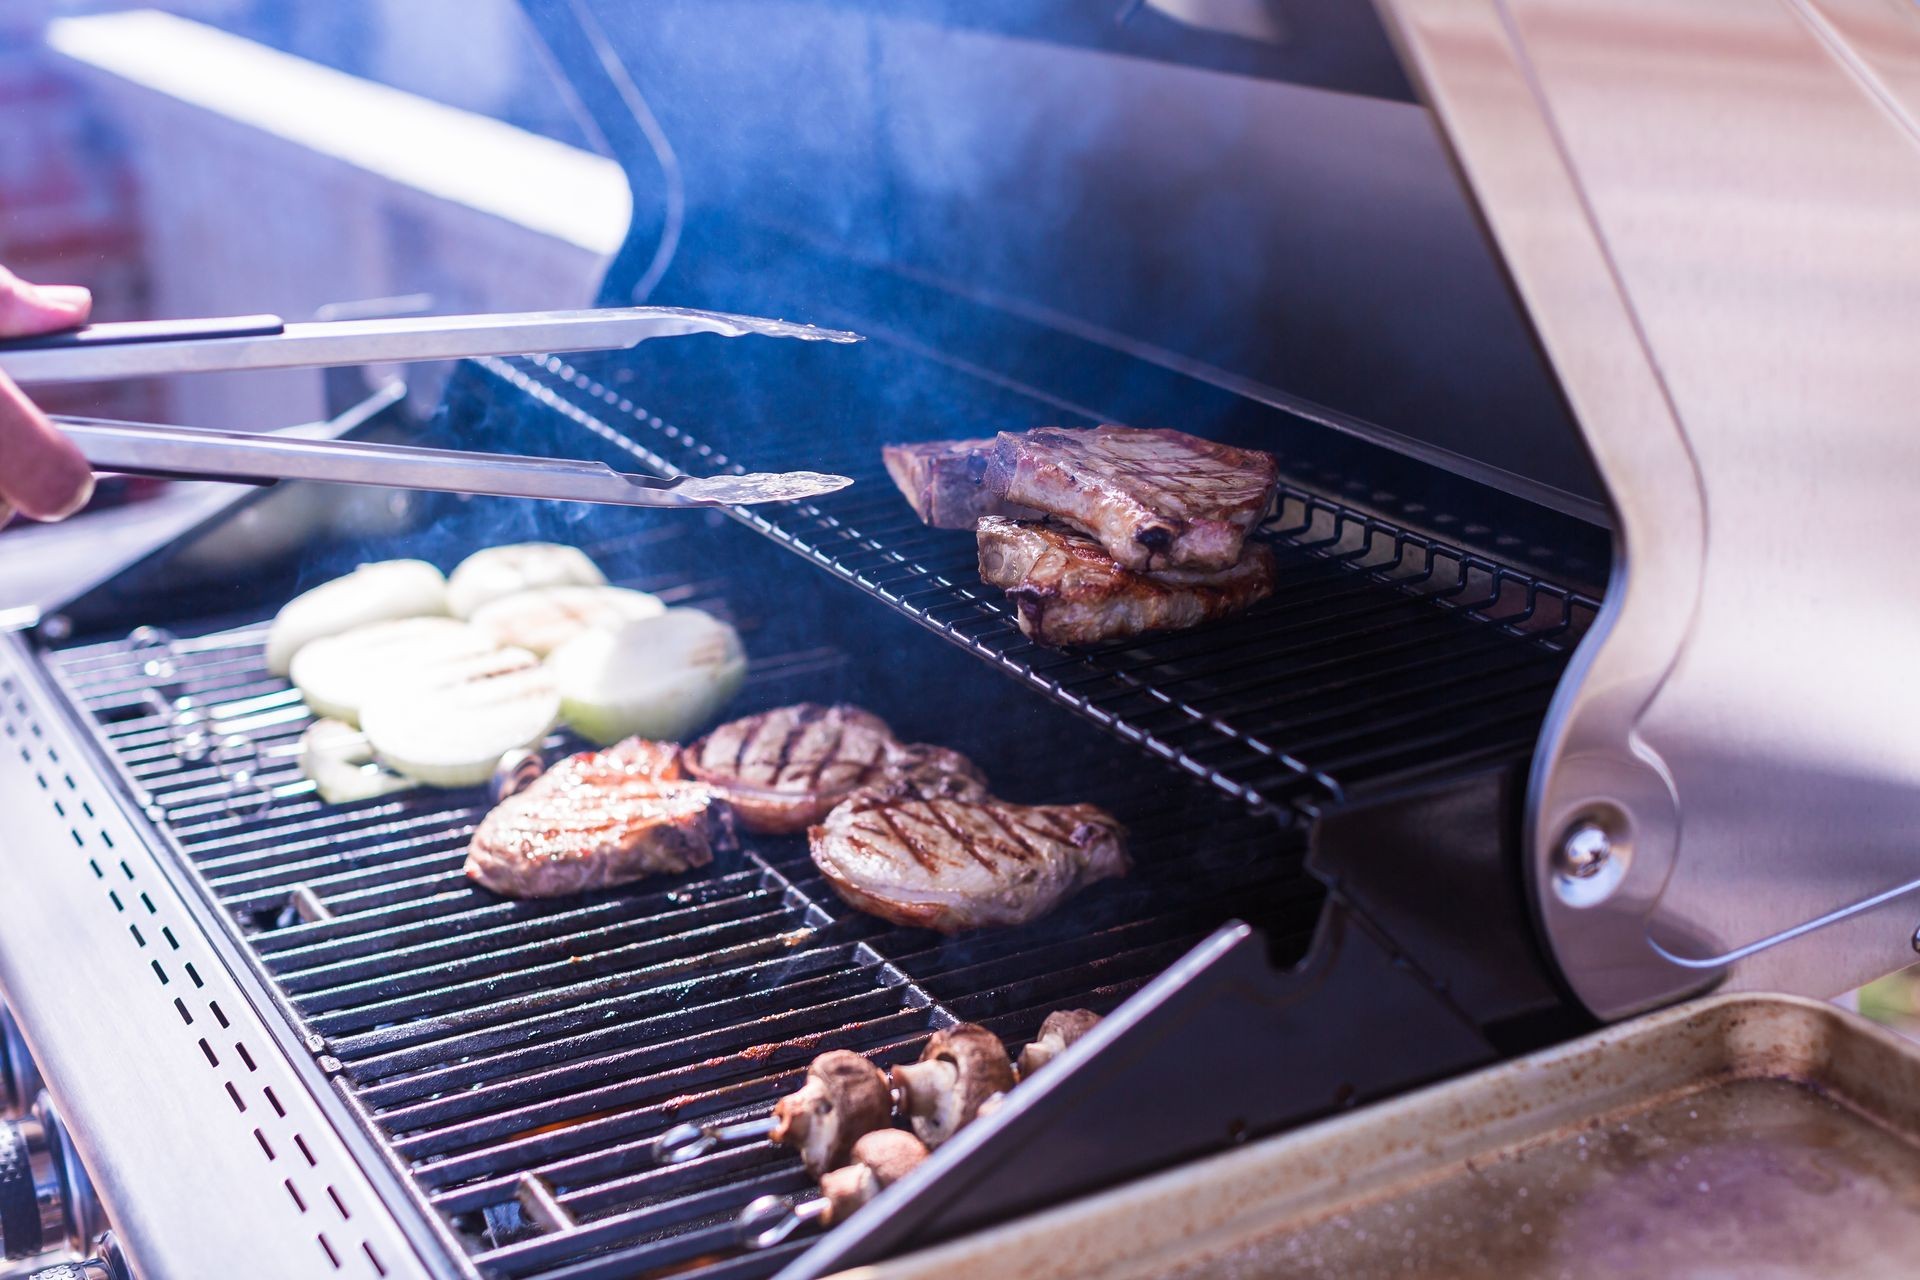 Grilling pork chops on gas grill in the Summer.